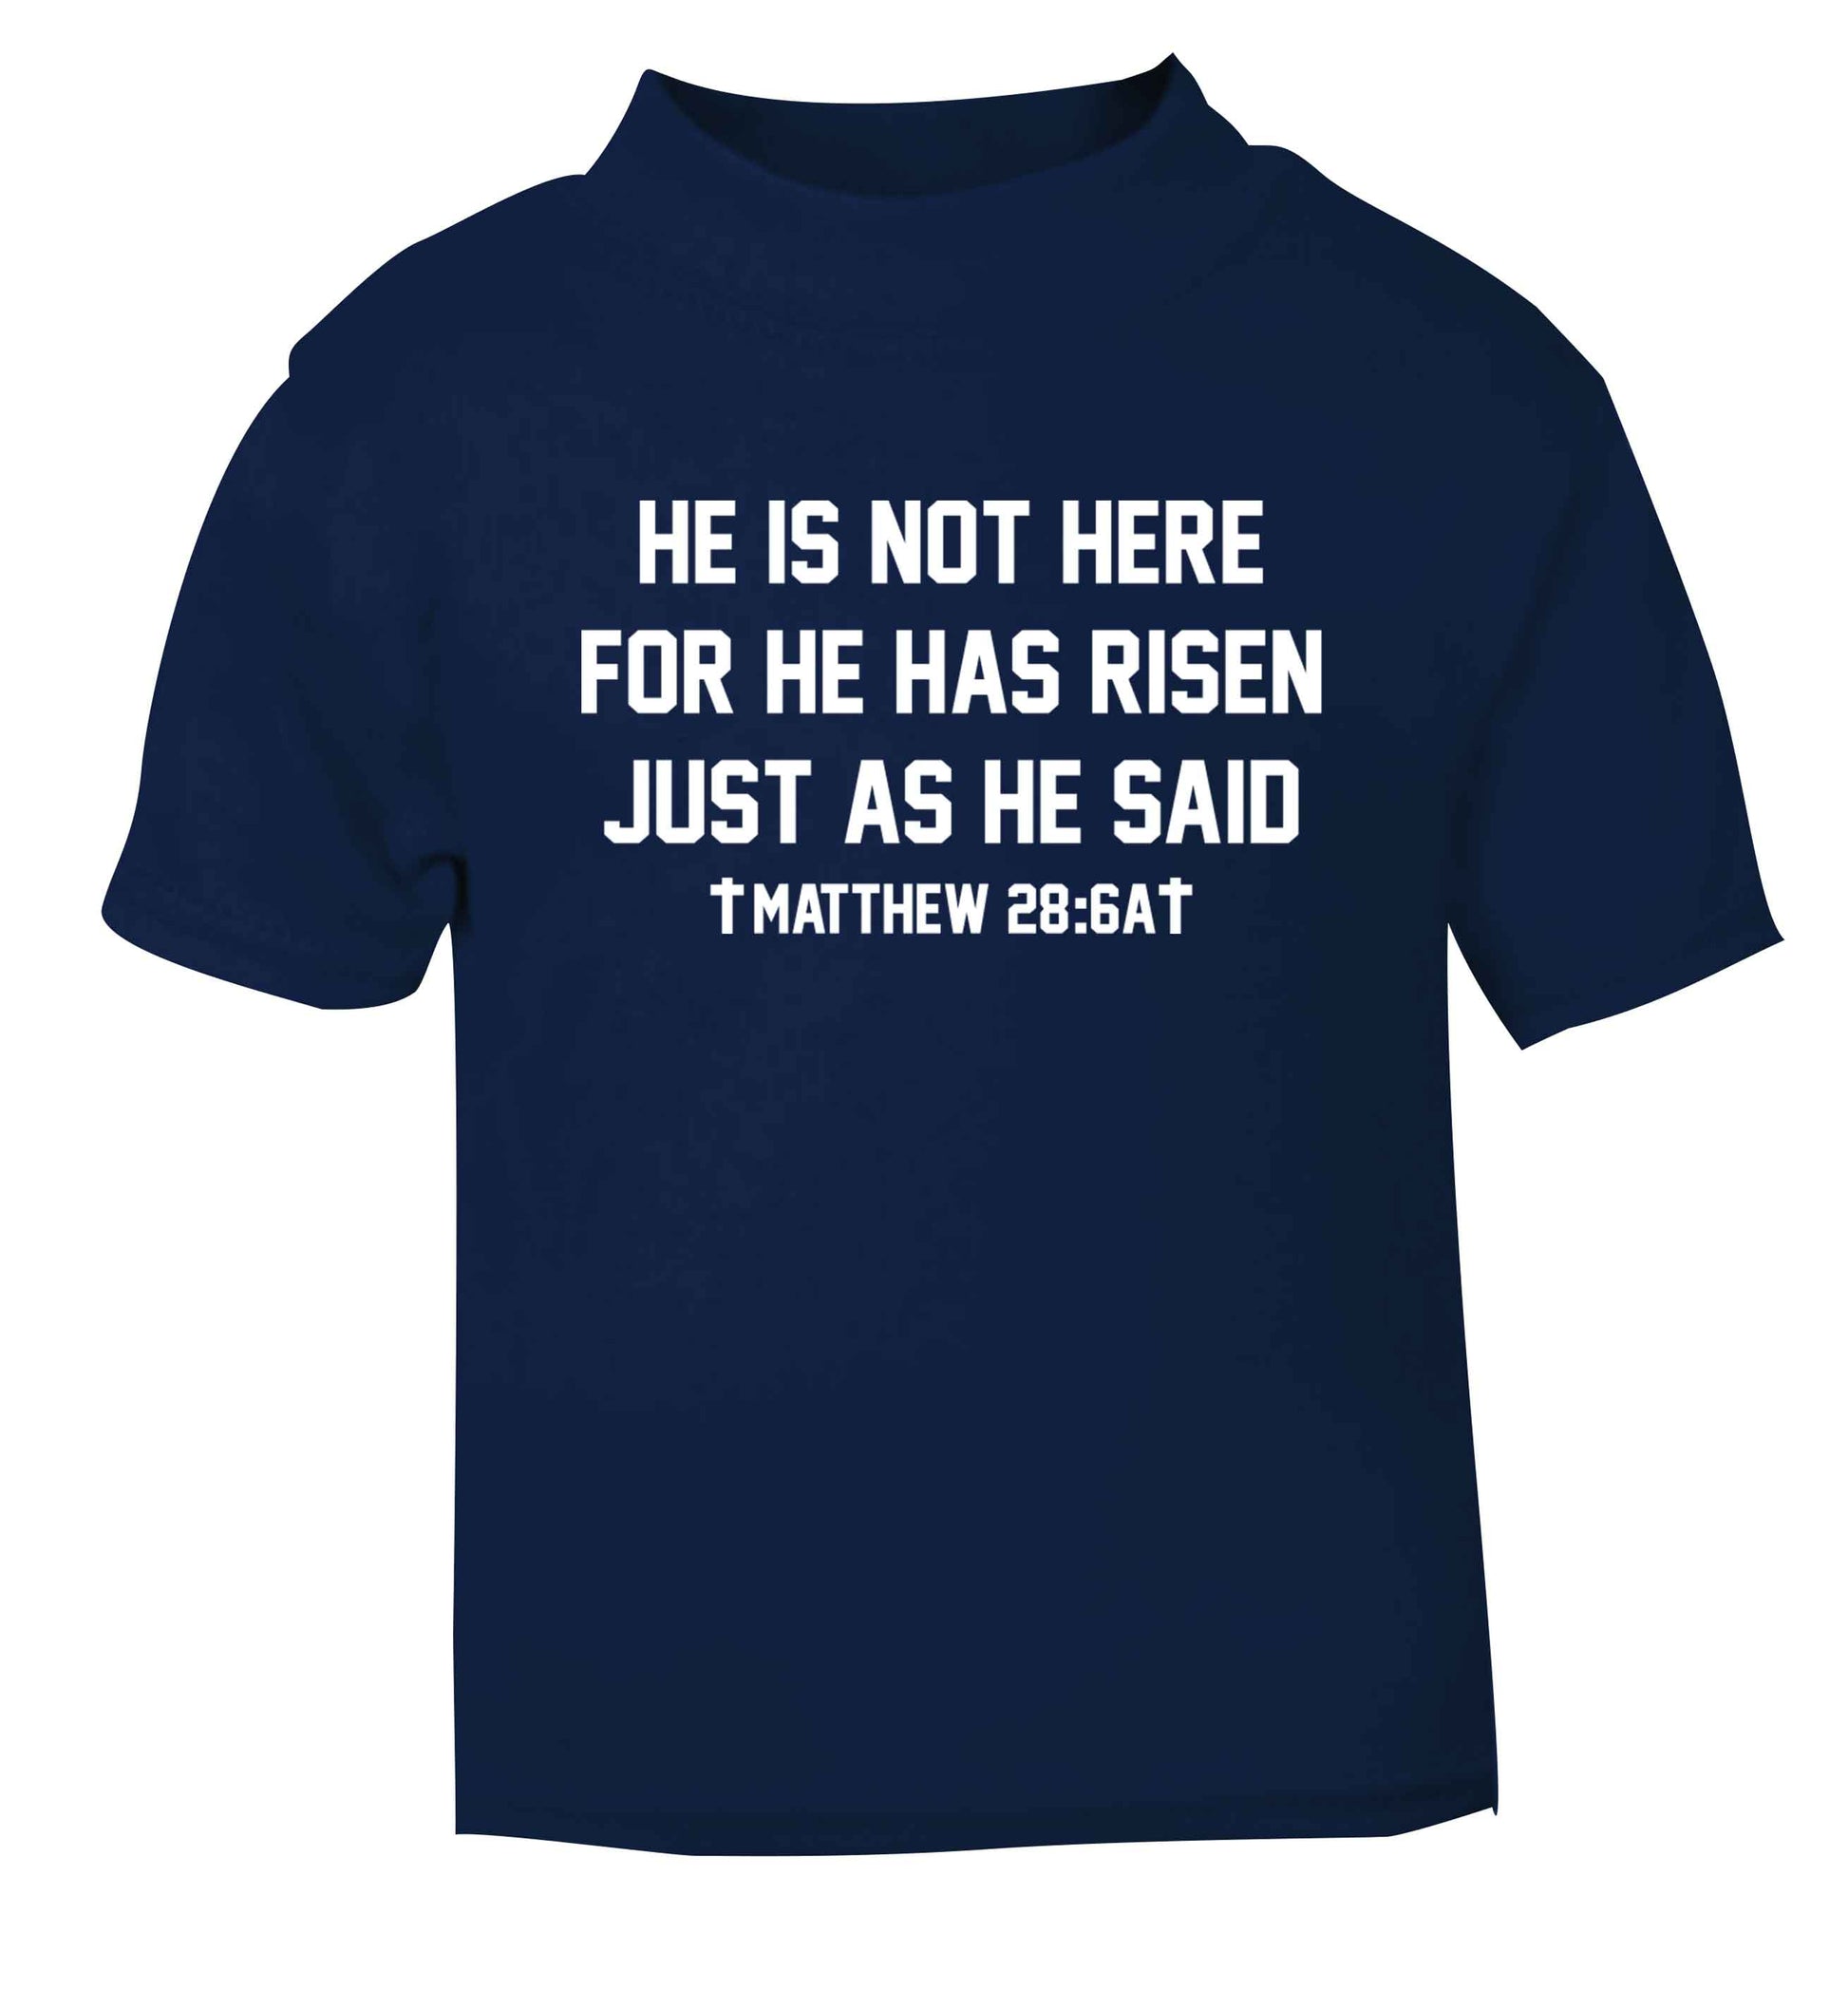 He is not here for he has risen just as he said matthew 28:6A navy baby toddler Tshirt 2 Years